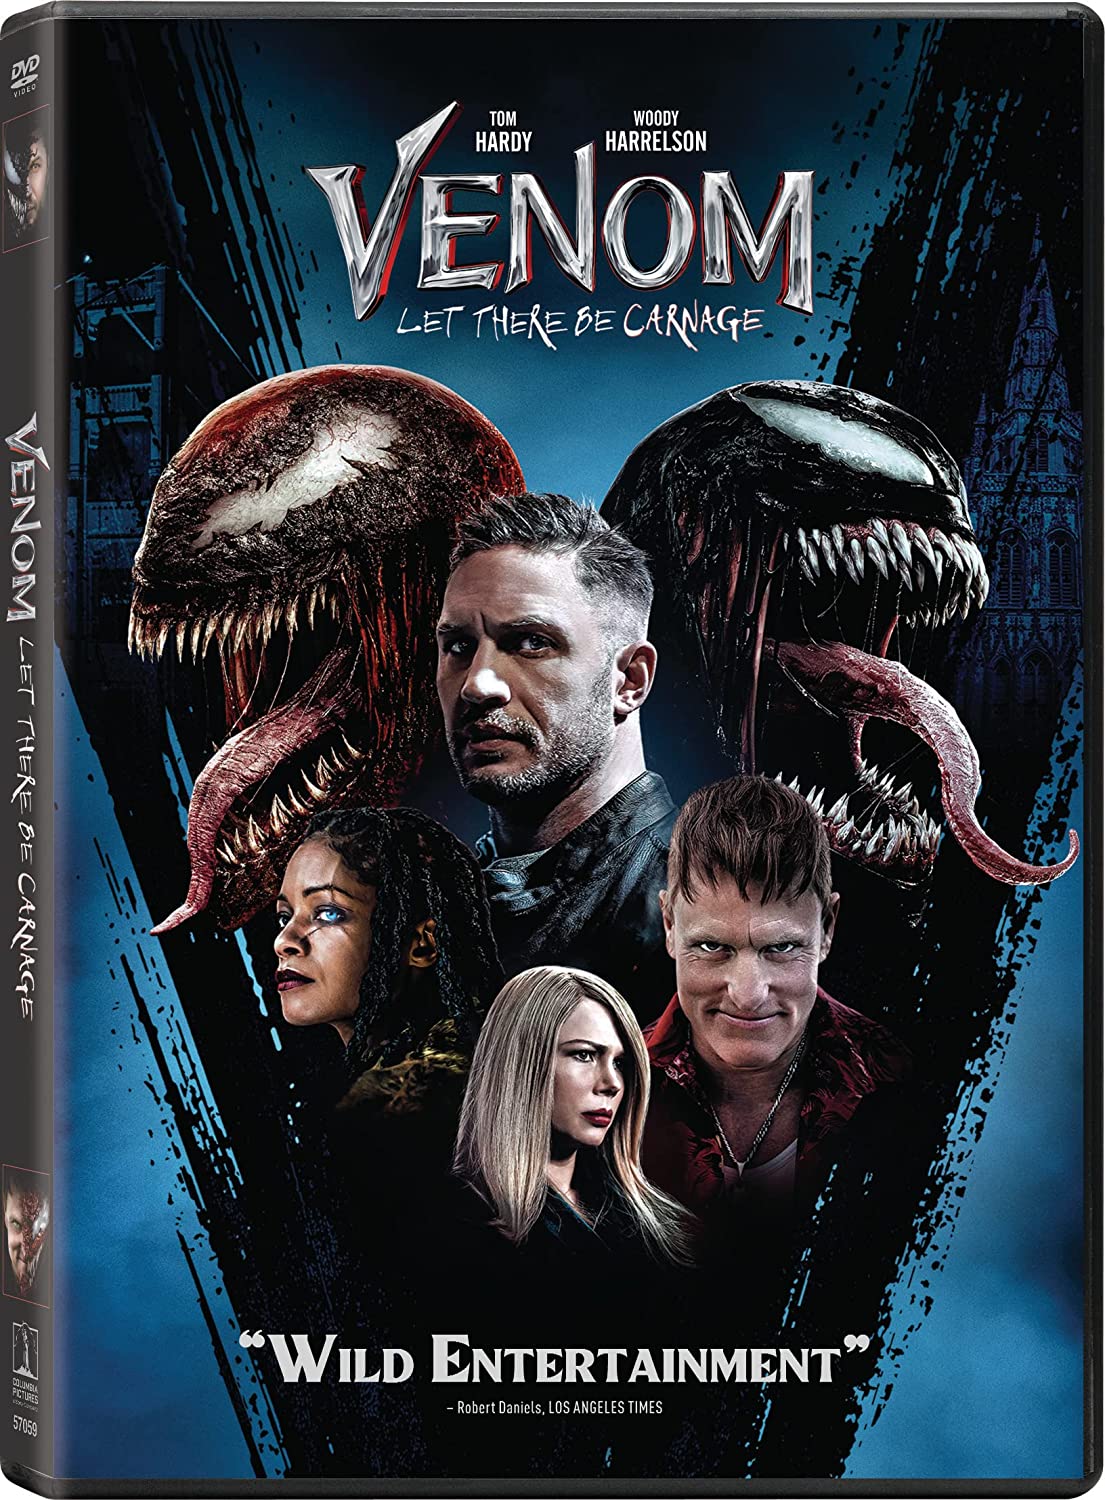 Venom- Let There Be Carnage DVD